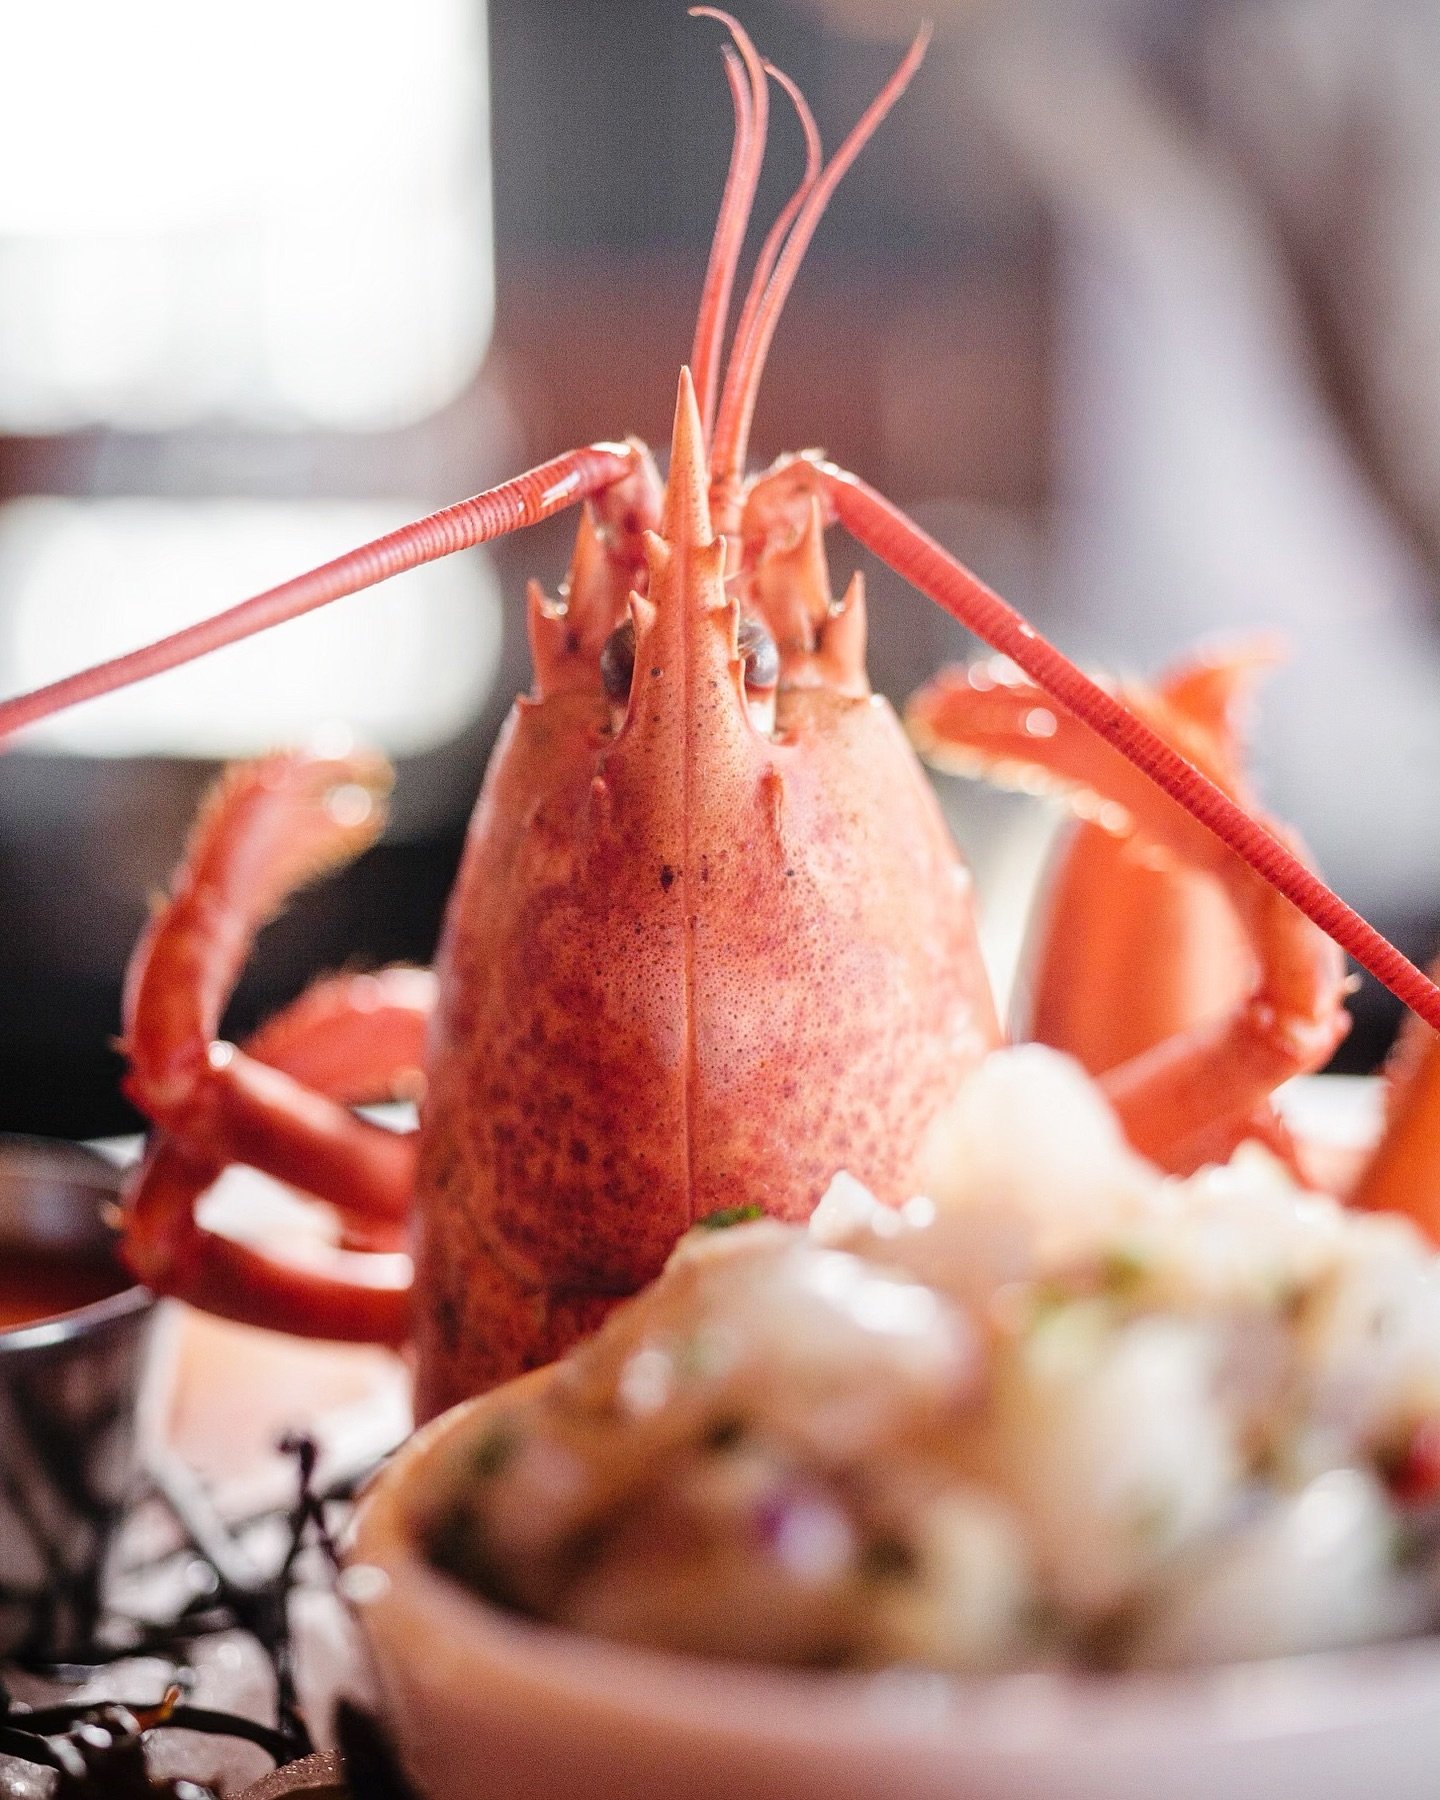 Indulge in a buttery lobster 🦞 feast here at The Pompano

✨ Kitchen opens at 5pm - place your reservation on @opentable 

#thepompano #lobster #lobsterdinner #ctbites #203local #connecticutrestaurants #sono #southnorwalk #norwalkct #dinnertime #newr